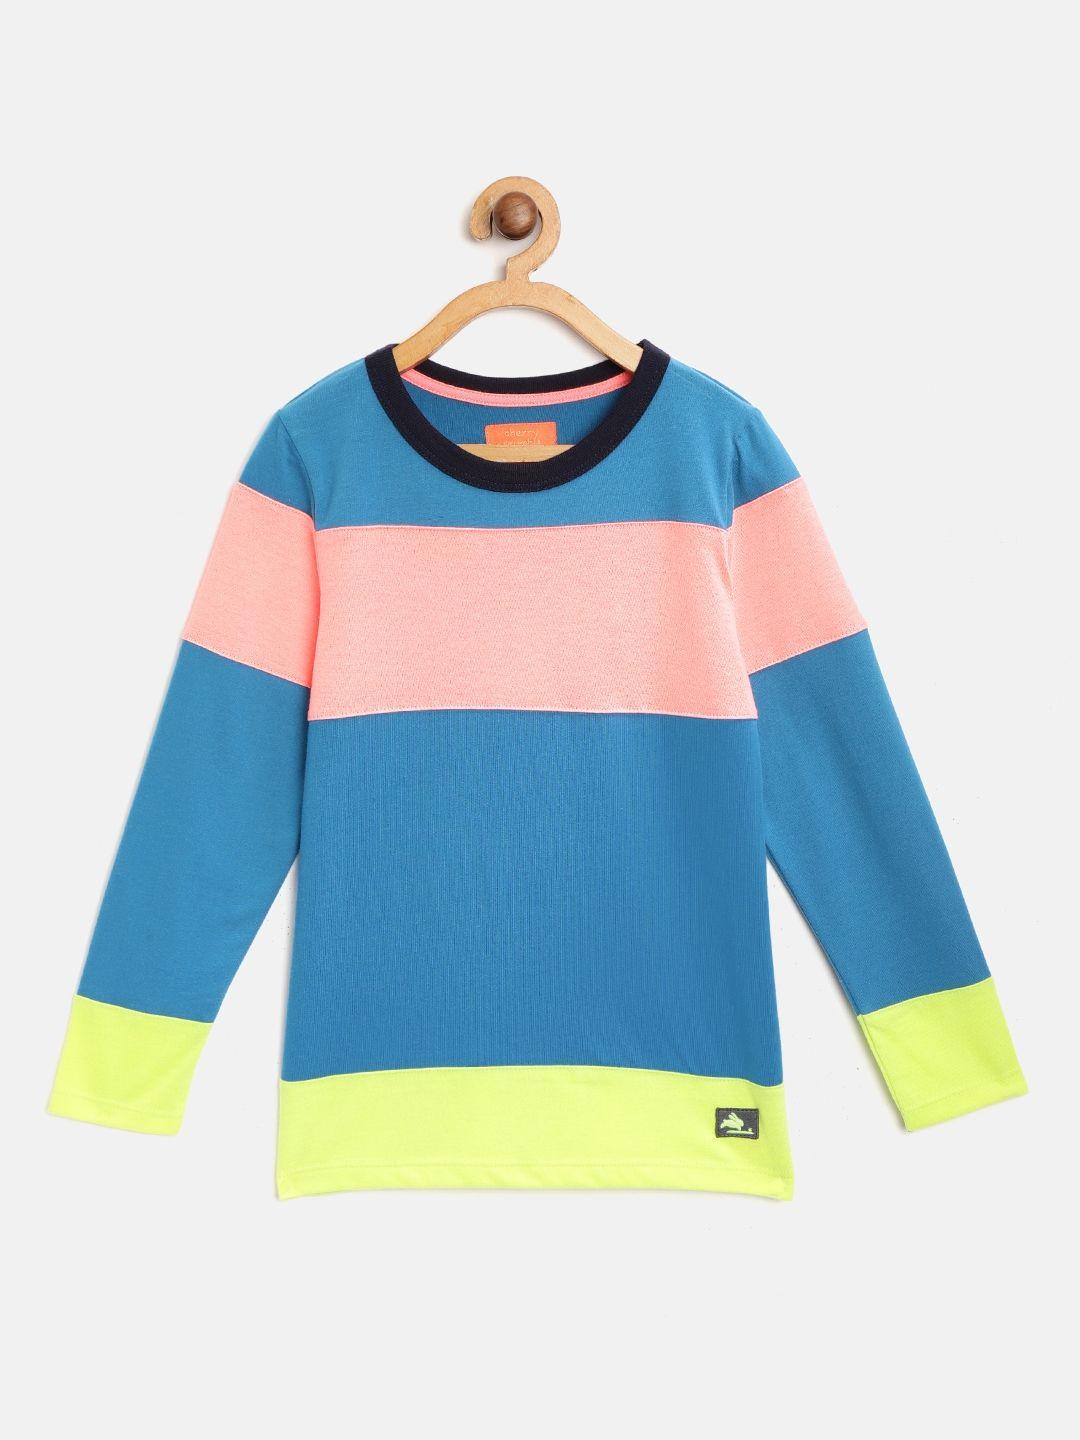 cherry-crumble-boys-teal-blue-&-coral-pink-colourblocked-round-neck-t-shirt